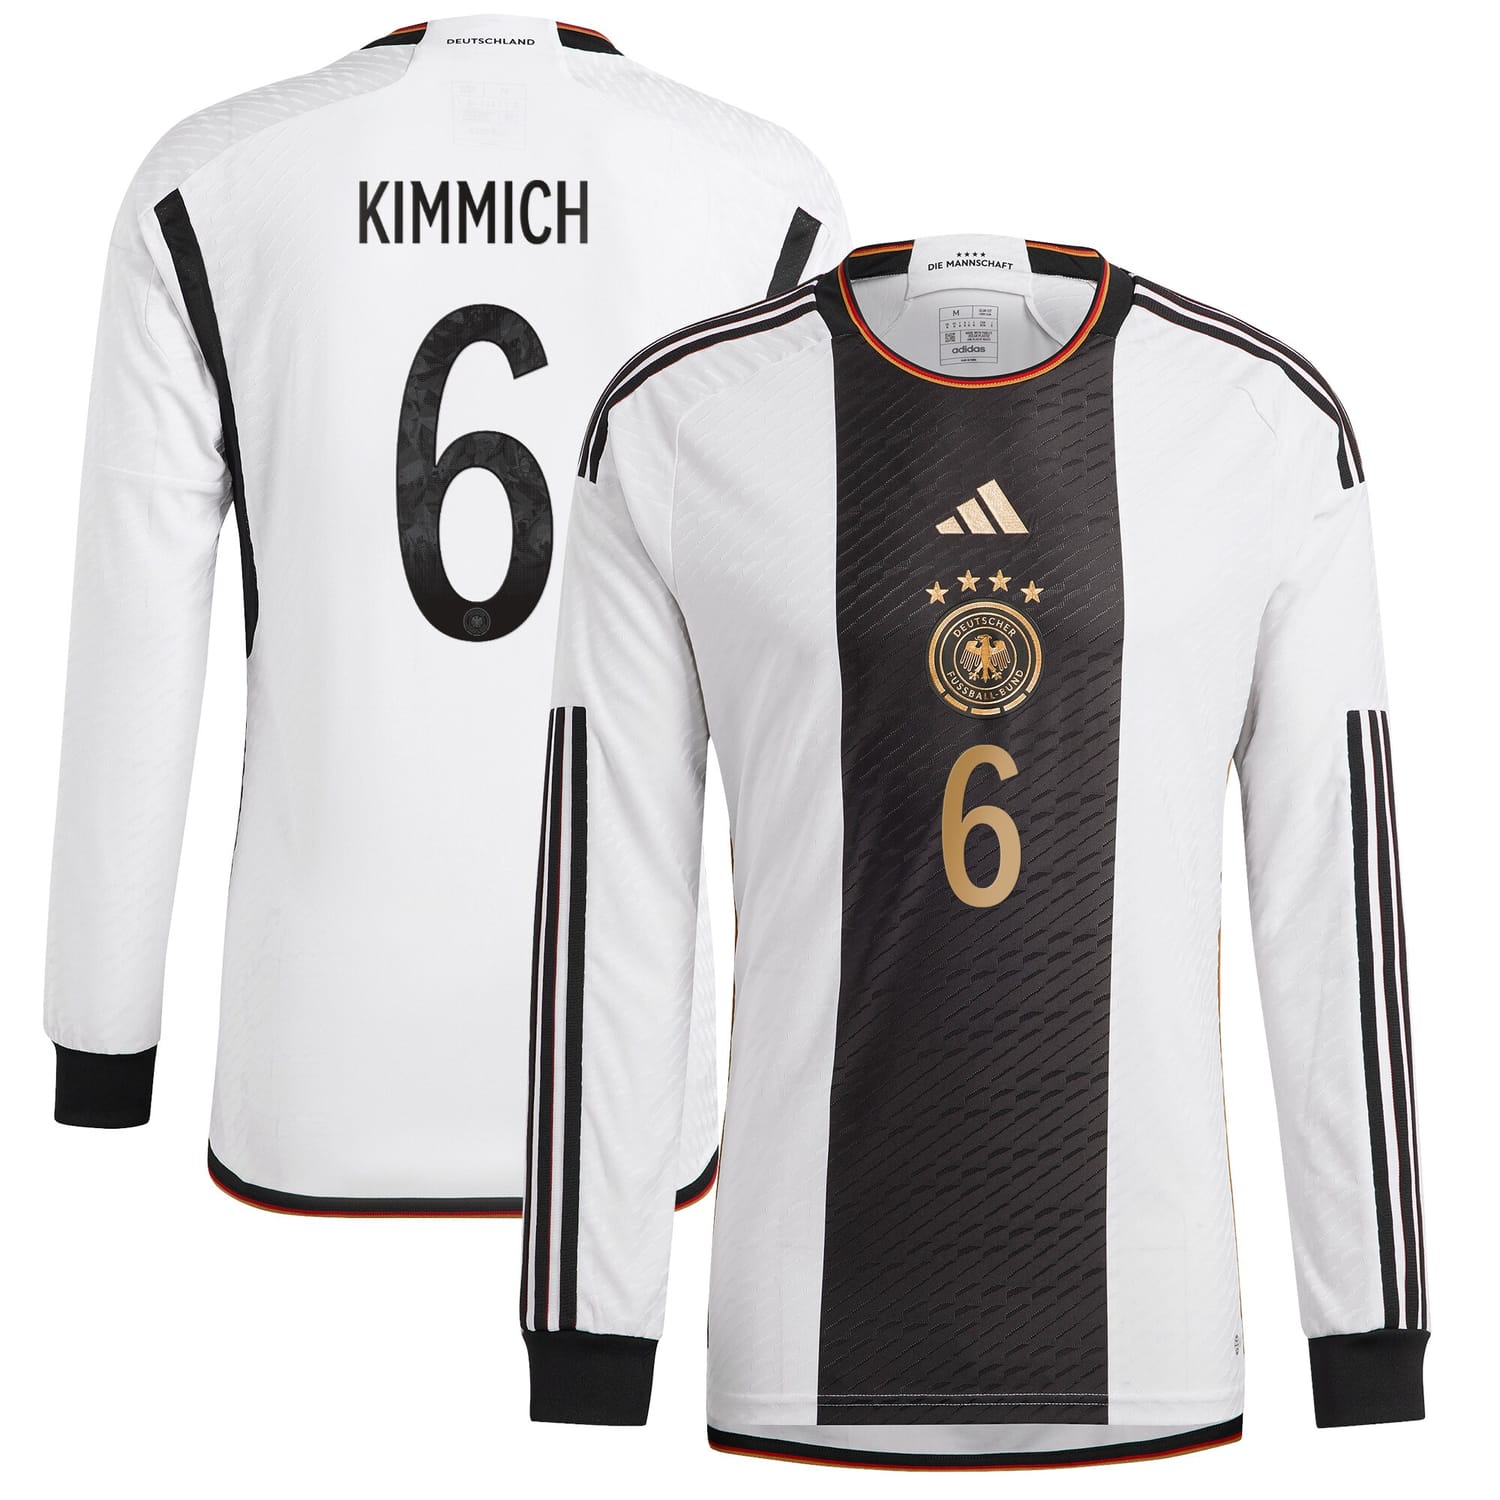 Germany National Team Home Authentic Jersey Shirt Long Sleeve player Joshua Kimmich 6 printing for Men